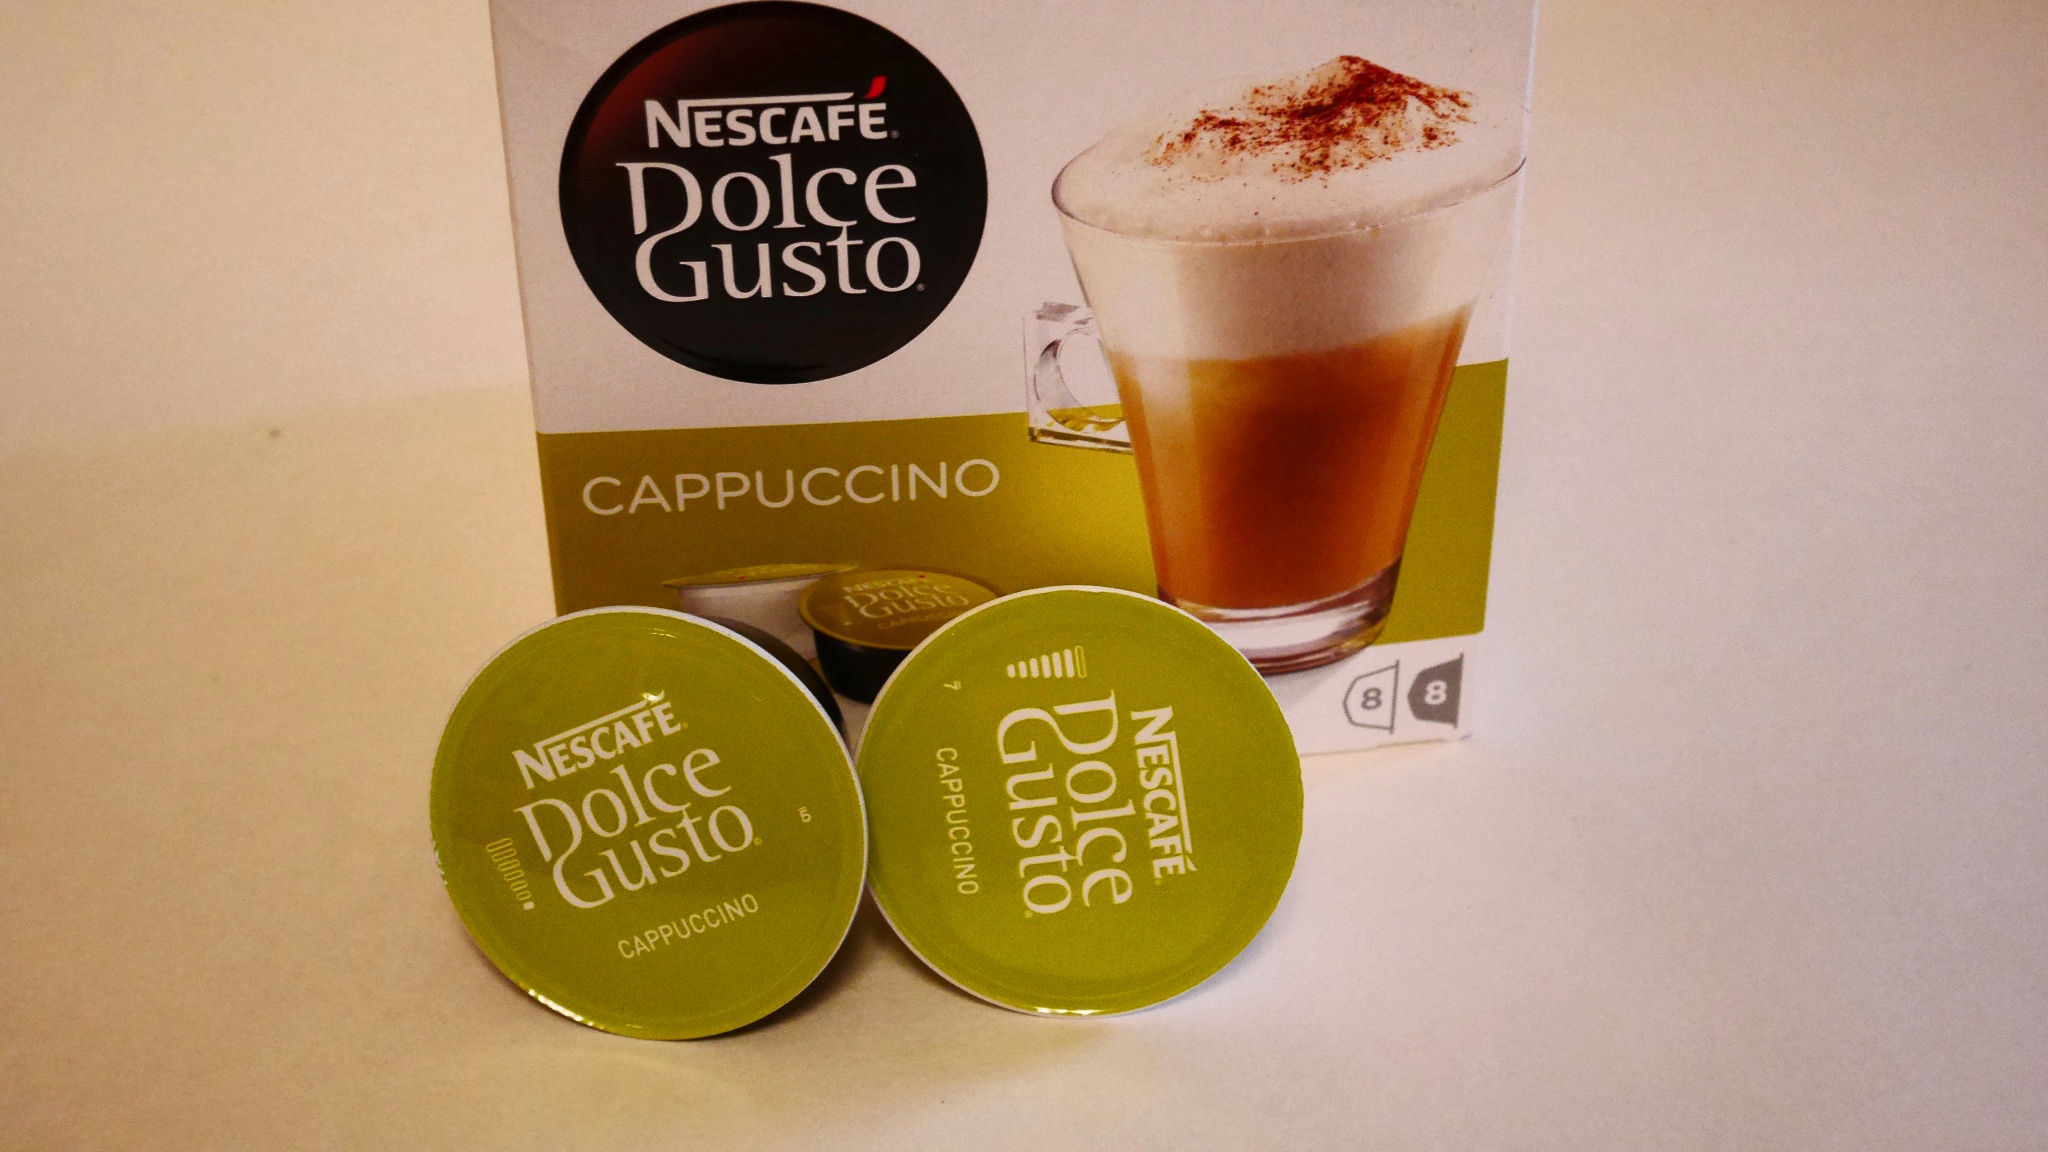 Капсулы Nescafe Dolce gusto Cappuccino. Nescafe Dolce gusto капсулы. Lebo Coffee Cappuccino капсулы Dolce gusto. Кофе в капсулах Nescafe Dolce gusto 87377 капучино. Dolce gusto cappuccino